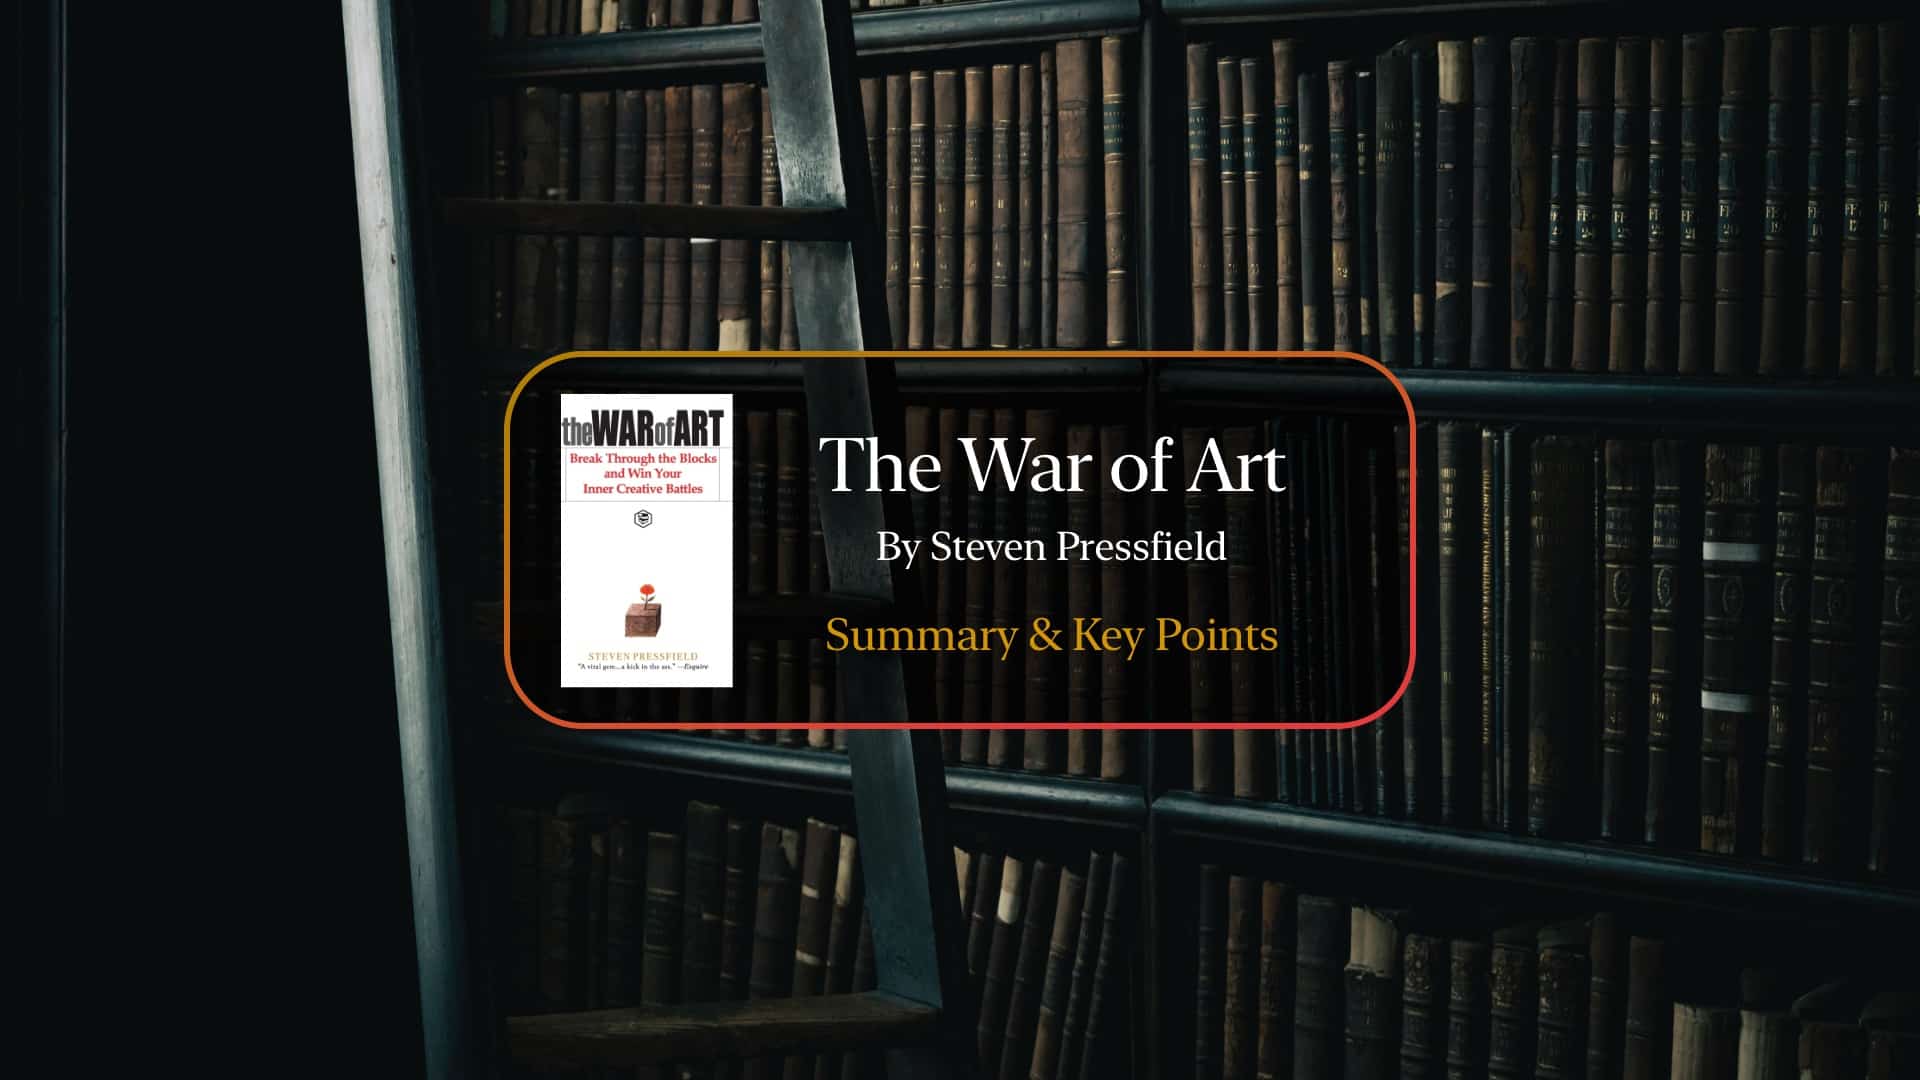 Steven Pressfield (Author of The War of Art)